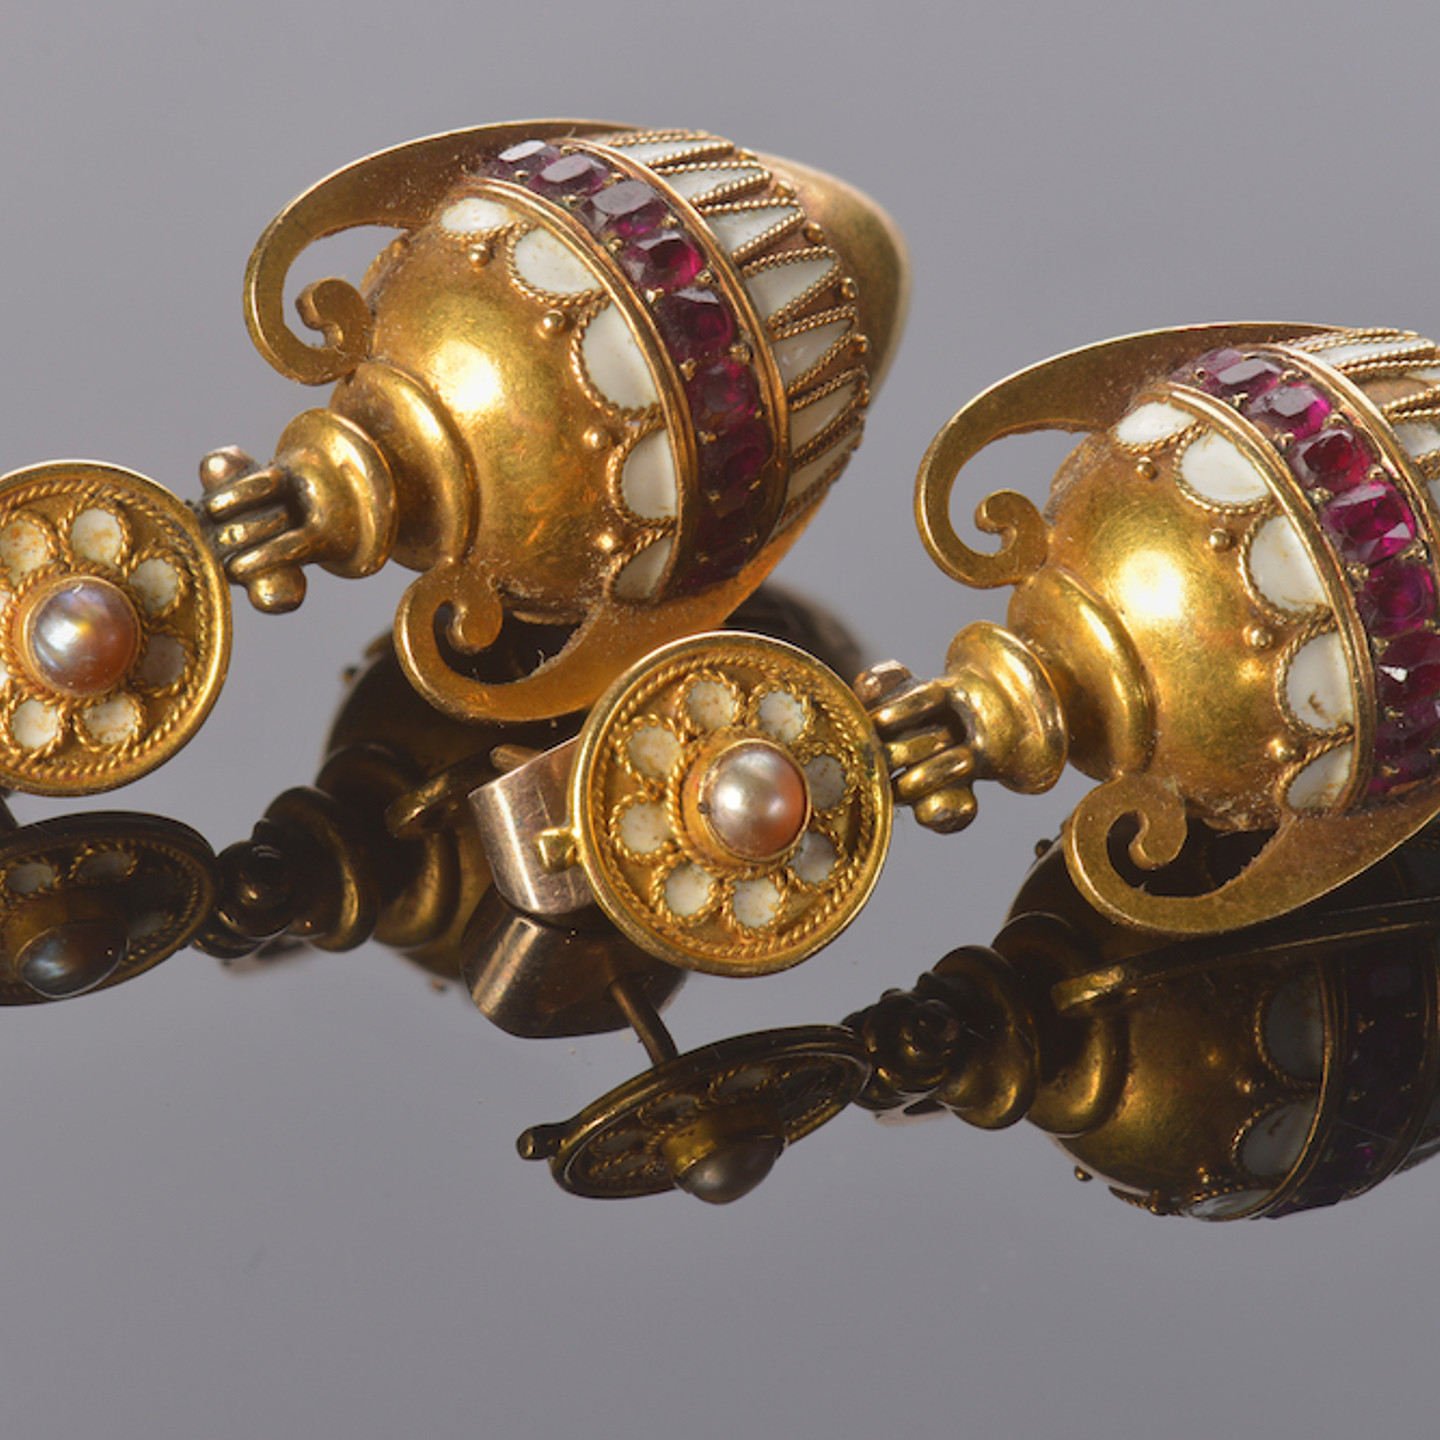 Carlo Giuliano Victorian Etruscan Revival Gold Earrings. Sold For £7,800